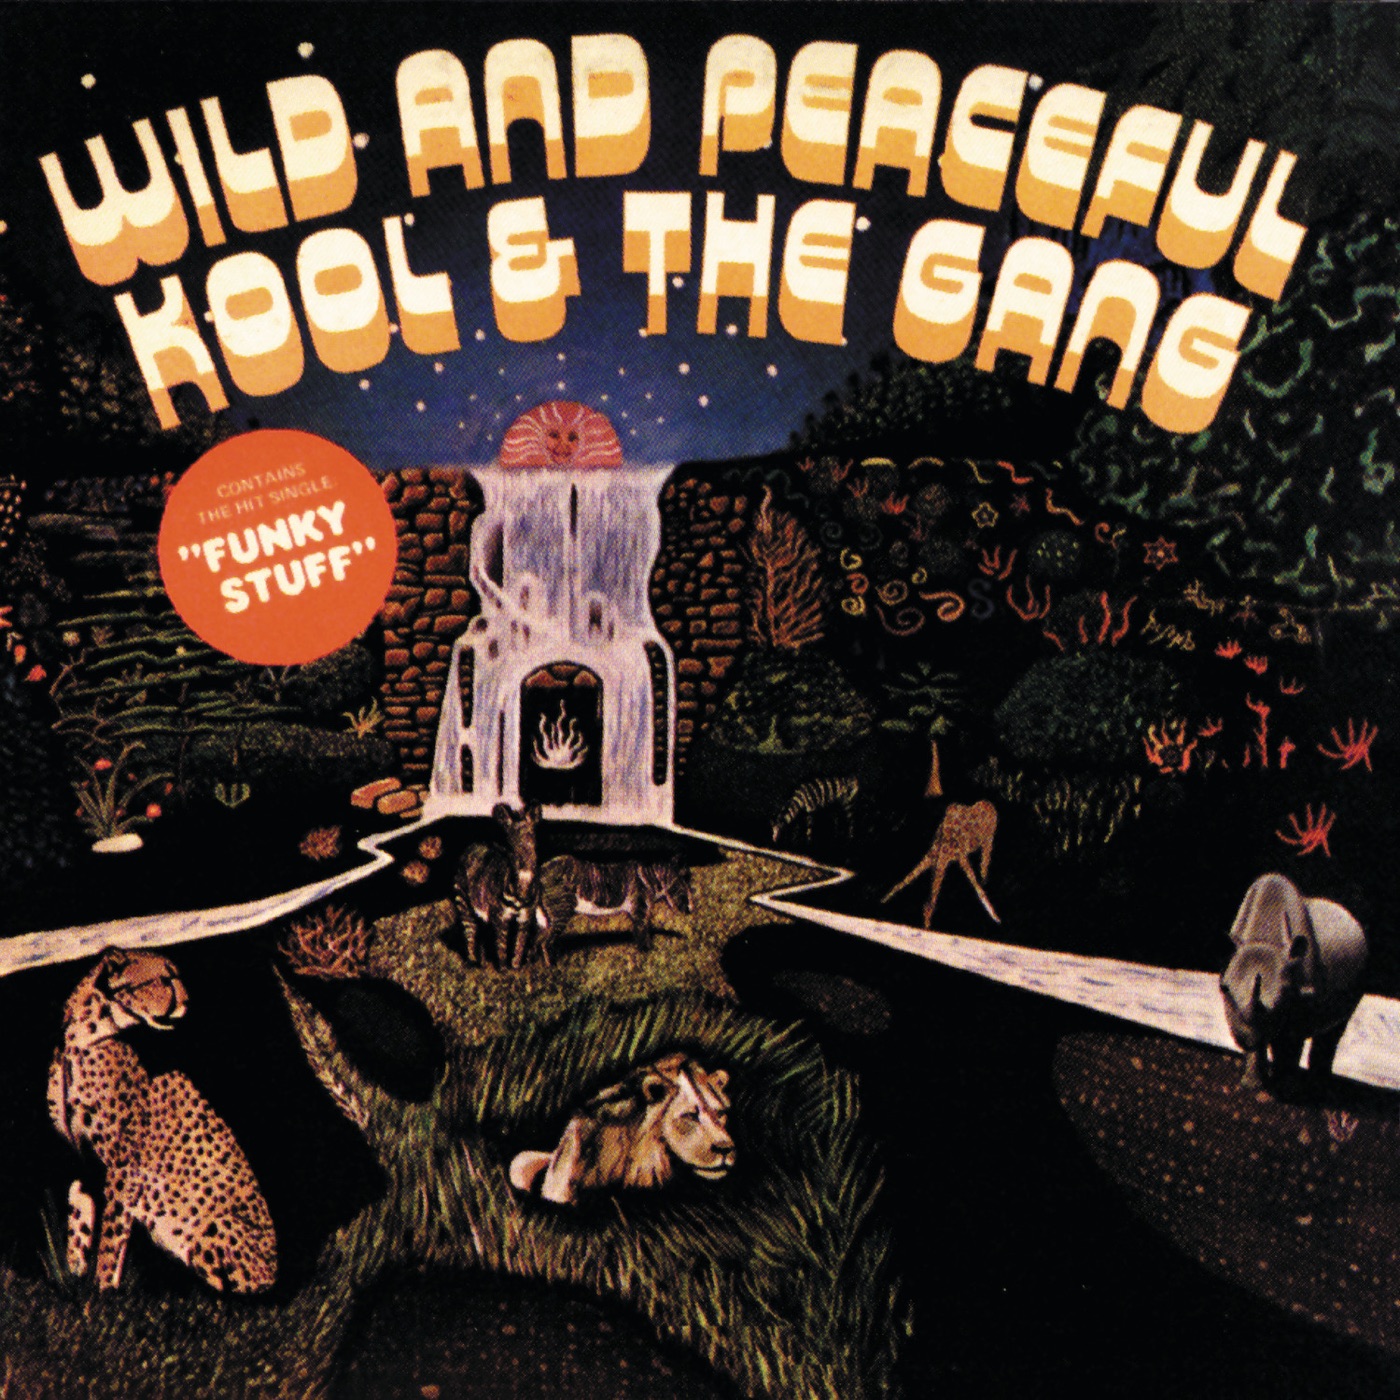 Wild and Peaceful by Kool & The Gang